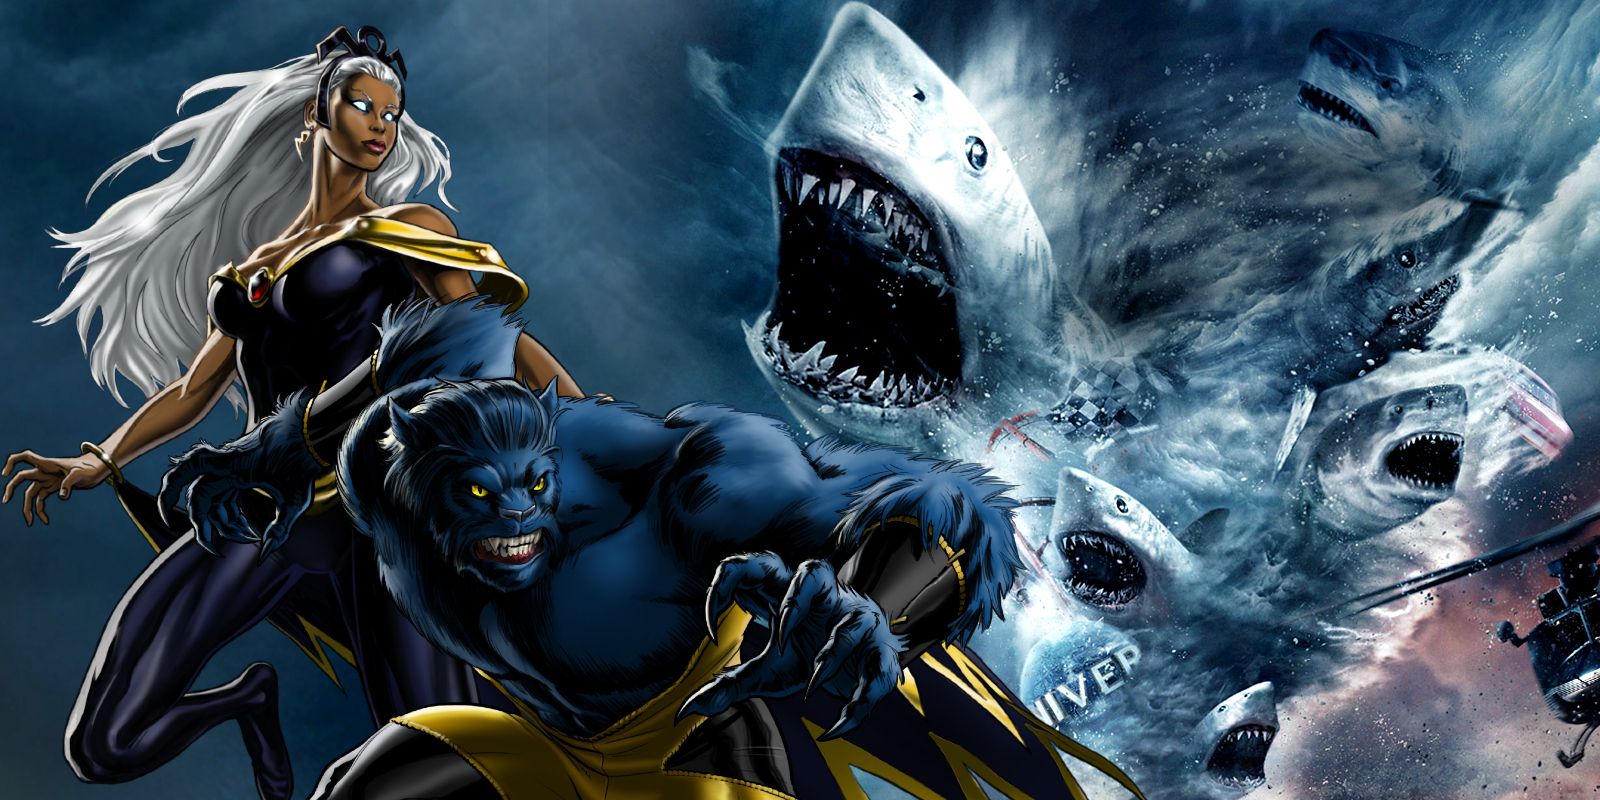 Sharknado Movie with X-Men Storm and Beast